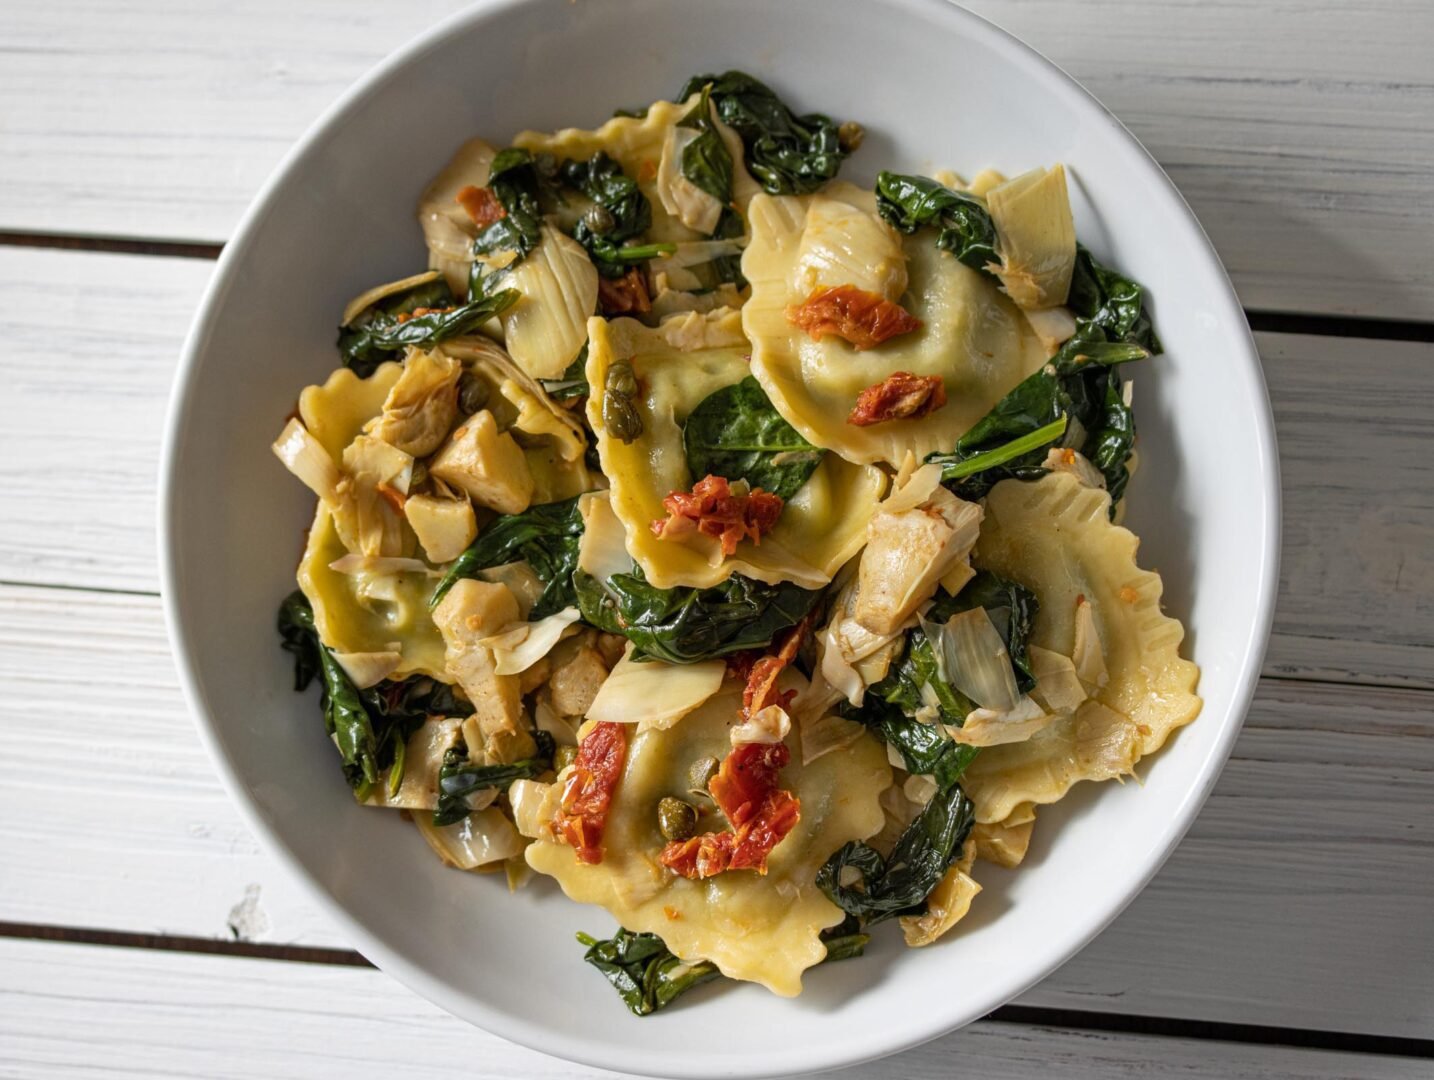 Ravioli with Artichokes Hearts, Capers, Sun-Dried Tomatoes, Spinach